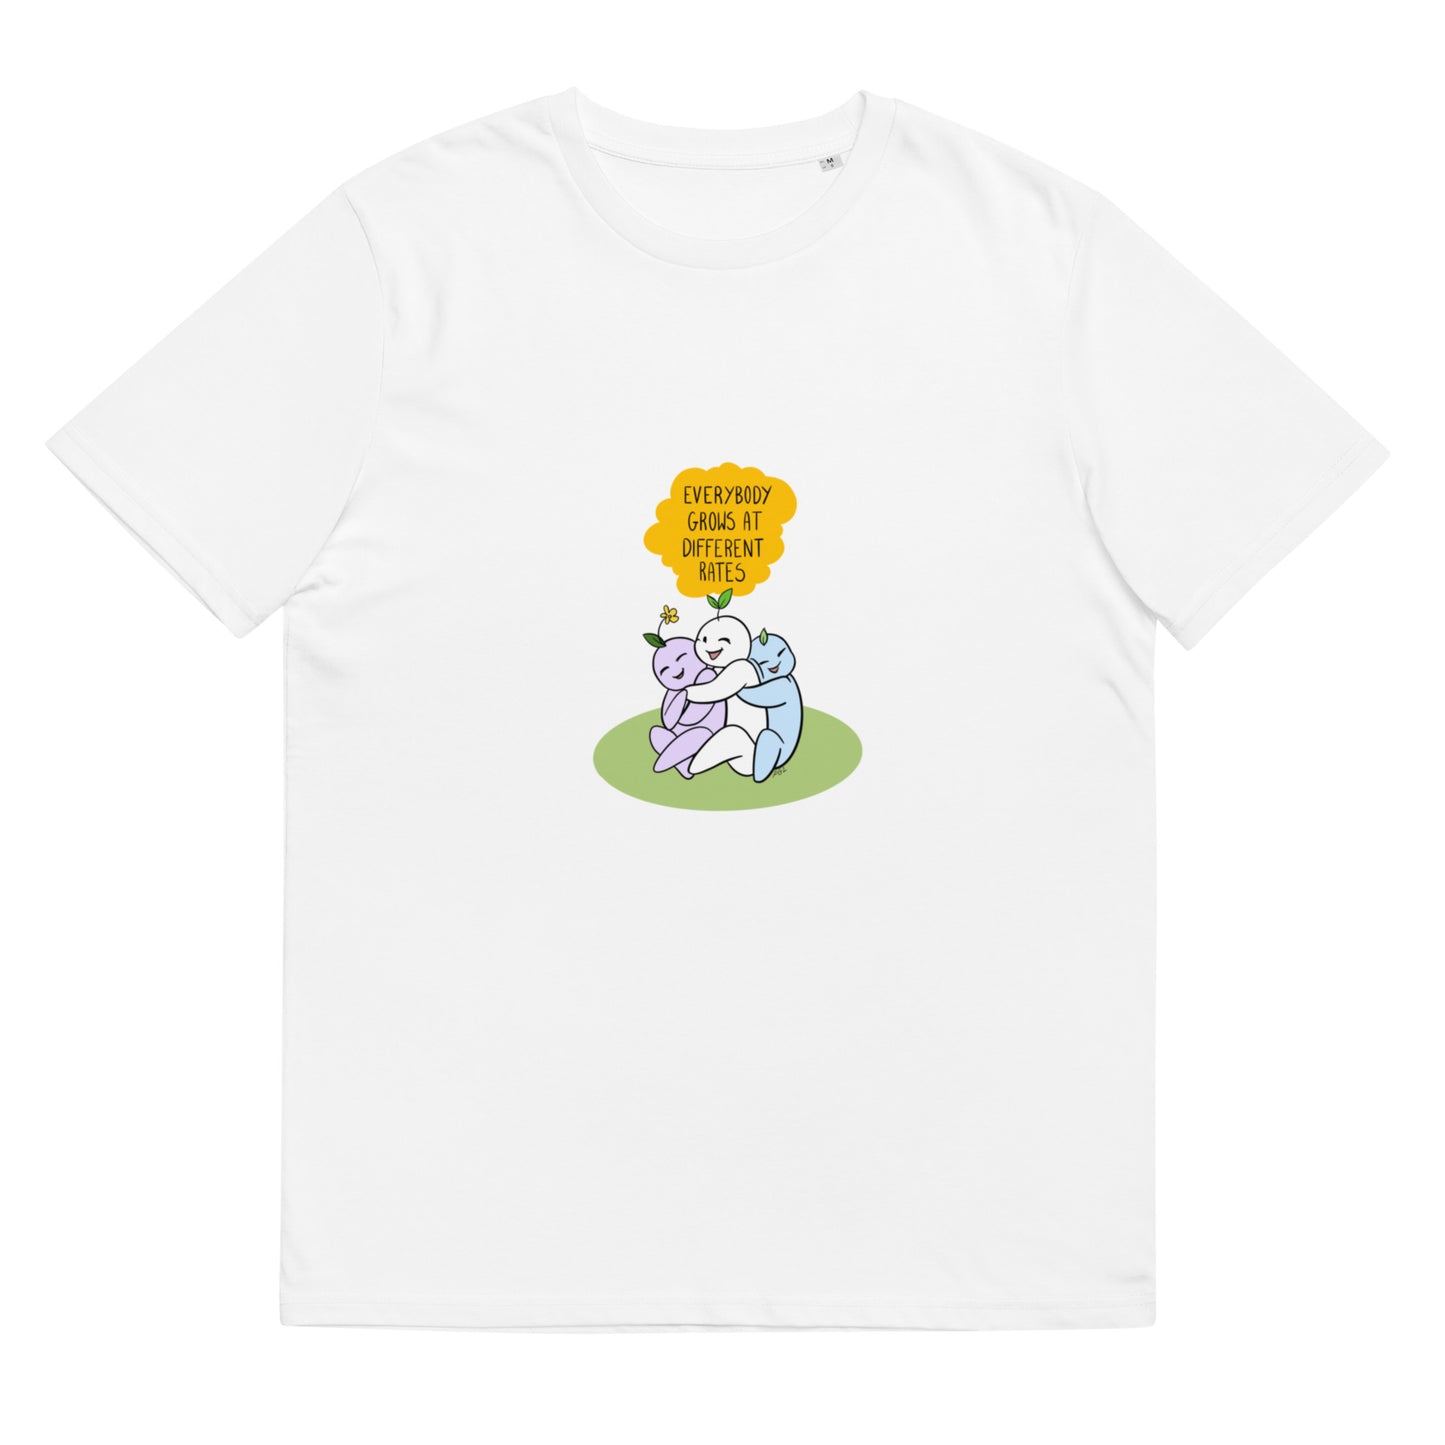 Everybody grows at different rates Unisex organic cotton t-shirt